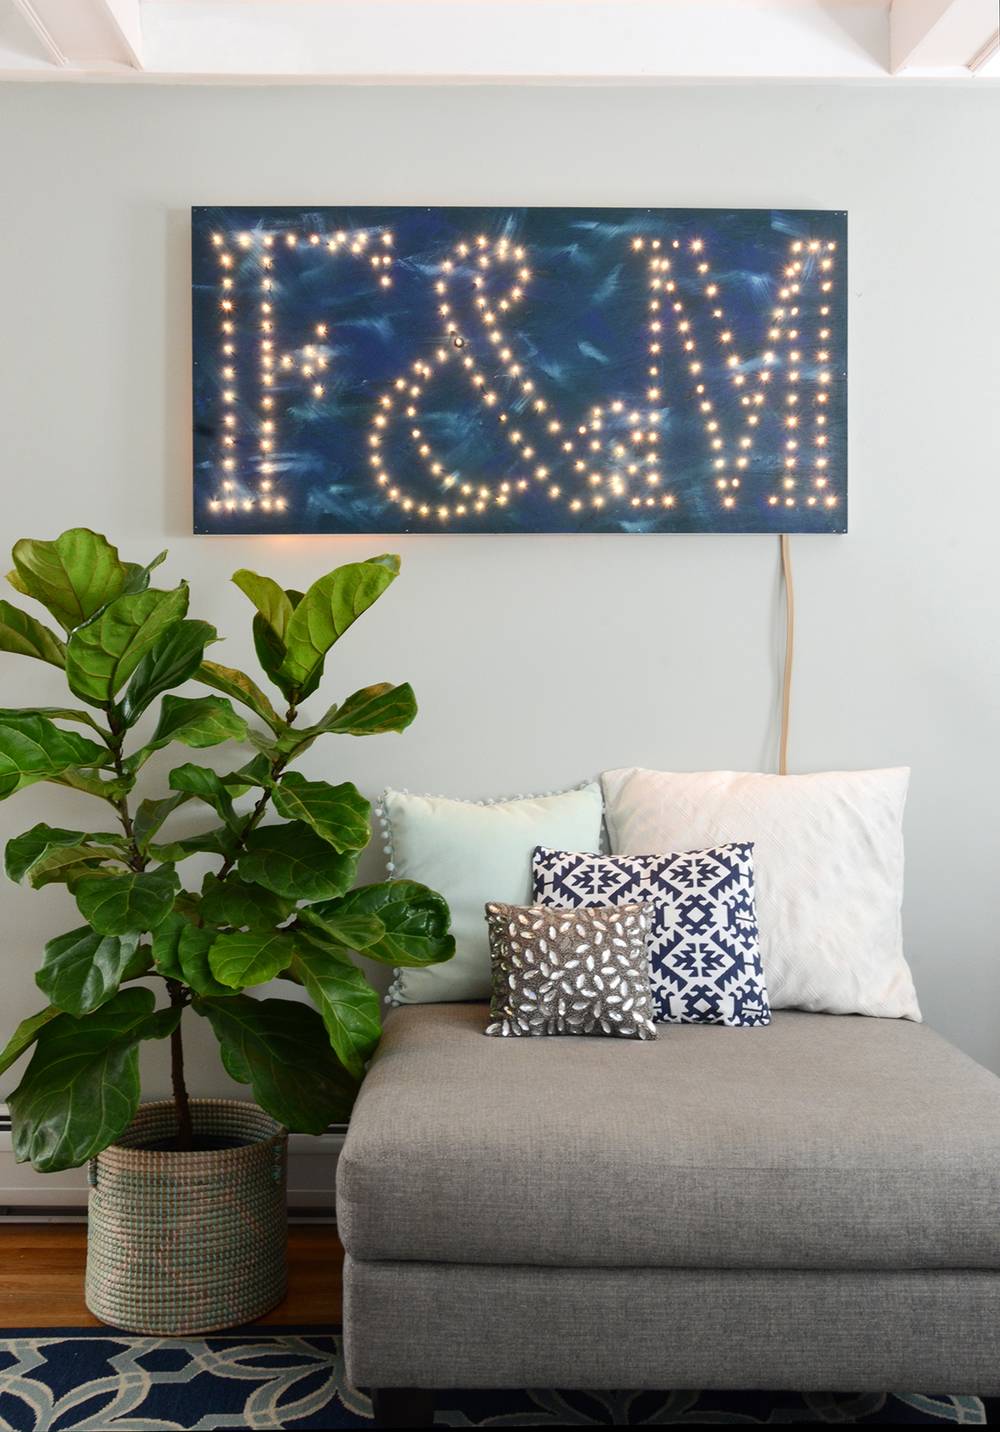 How-To: Funky DIY Monogram Marquee Sign